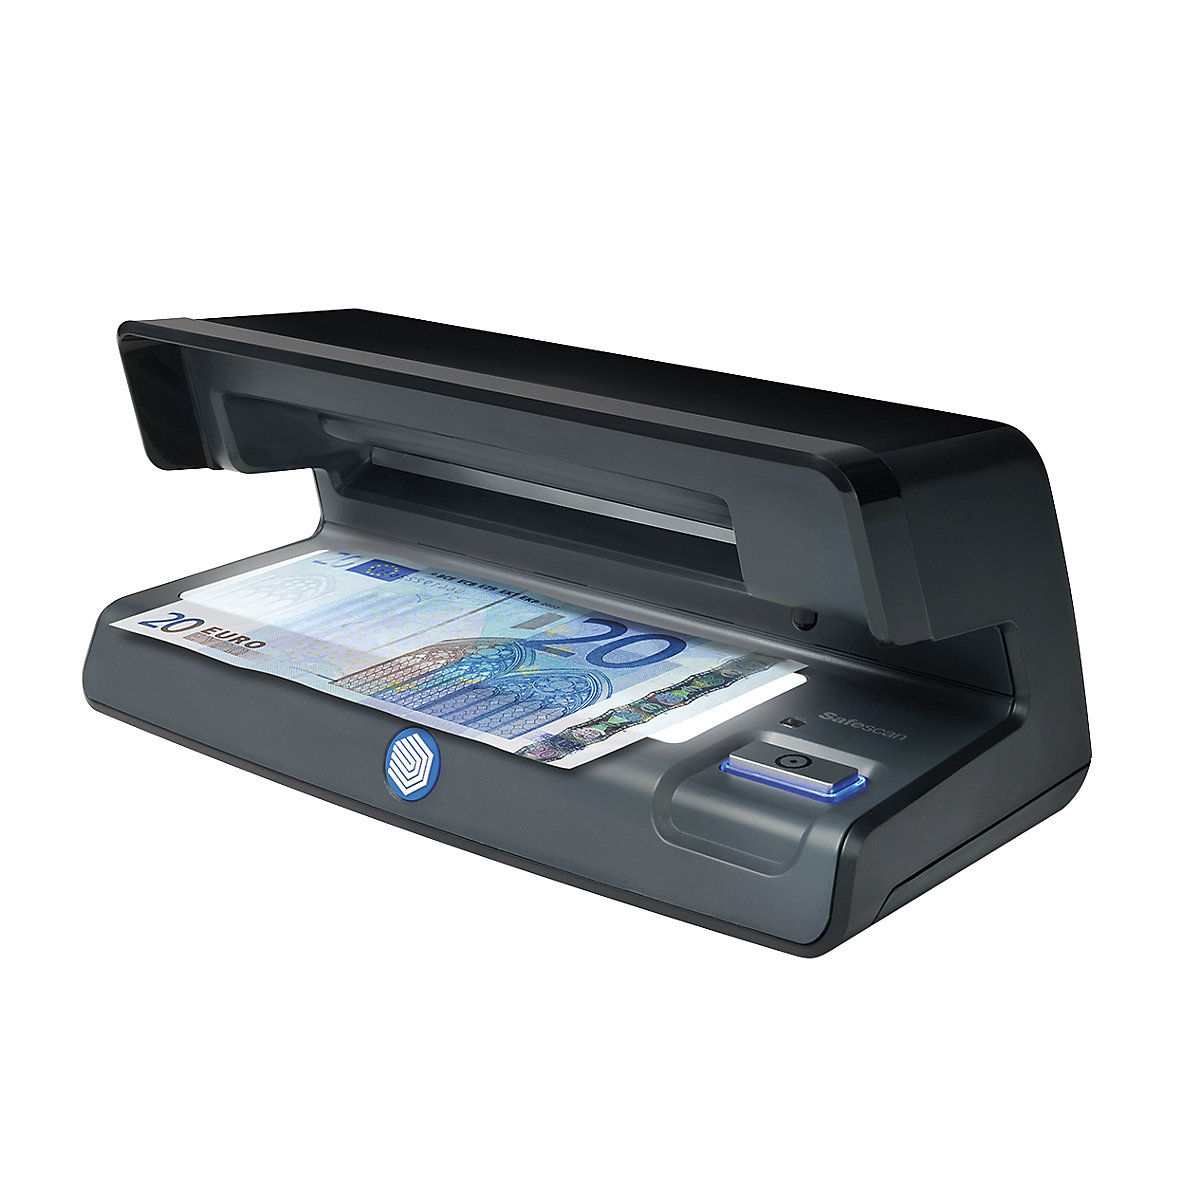 Counterfeit detector – Safescan (Product illustration 2)-1